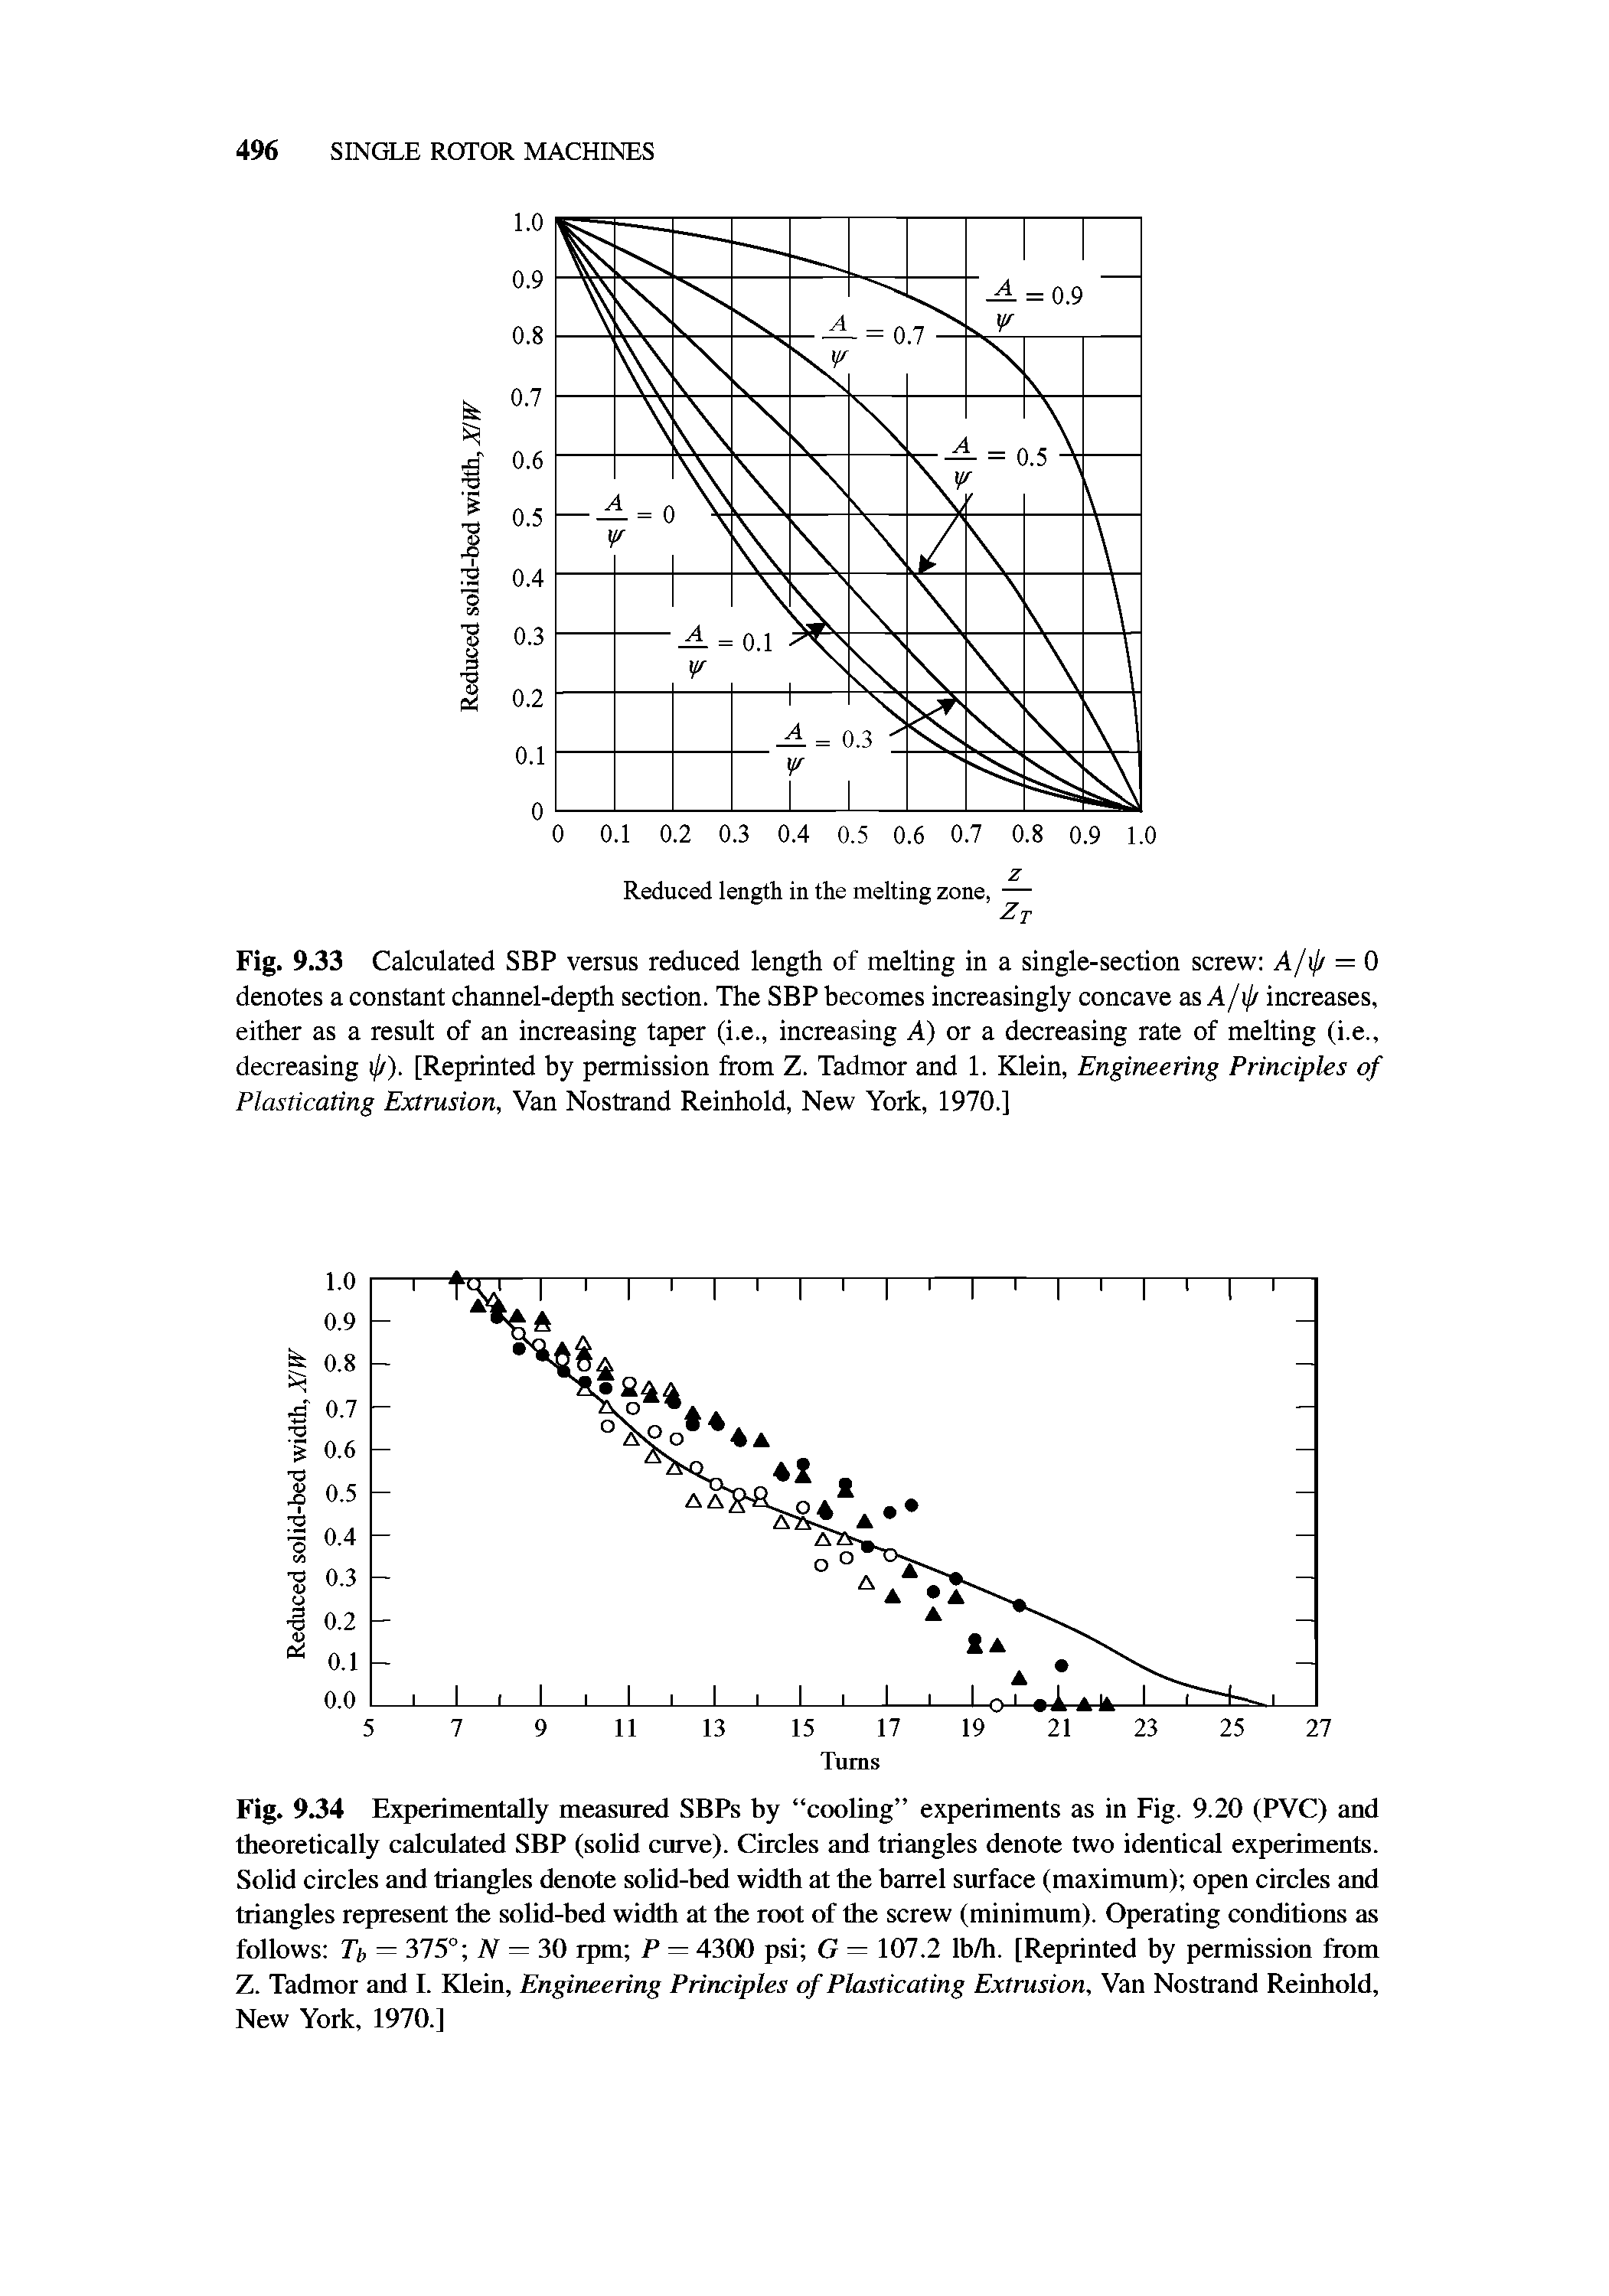 Fig. 9.33 Calculated SBP versus reduced length of melting in a single-section screw A/ j/ — 0 denotes a constant channel-depth section. The SBP becomes increasingly concave as A/ j/ increases, either as a result of an increasing taper (i.e., increasing A) or a decreasing rate of melting (i.e., decreasing ij/). [Reprinted by permission from Z. Tadmor and 1. Klein, Engineering Principles of Plasticating Extrusion, Van Nostrand Reinhold, New York, 1970.]...